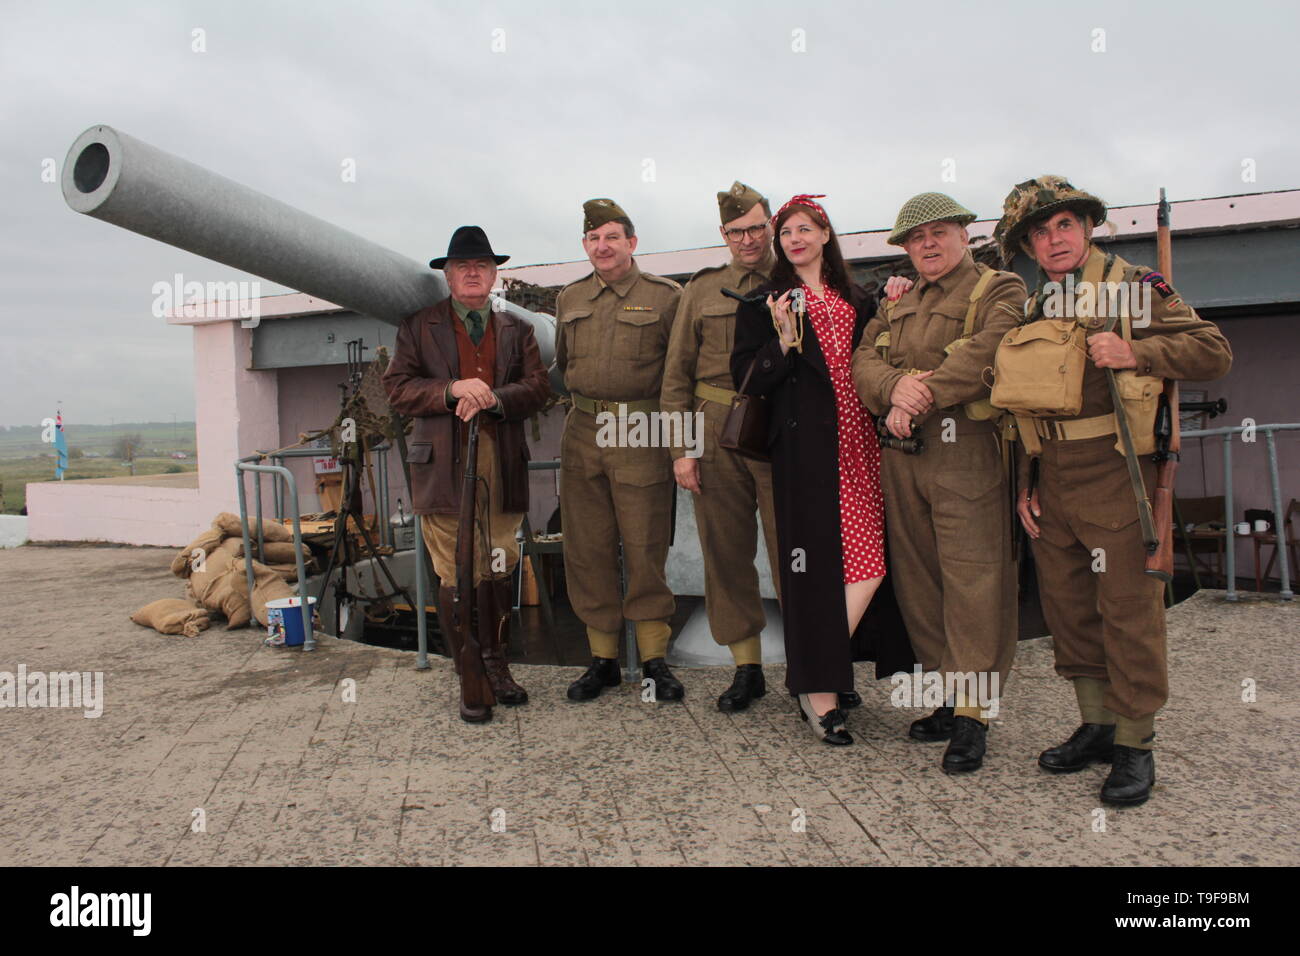 Blyth, UK. 18th May, 2019. D-Day 75 Years Ago Re-enactment Event at Grade  II Blyth Defence Artillery Battery in Credit: David Whinham/Alamy Live News  Stock Photo - Alamy